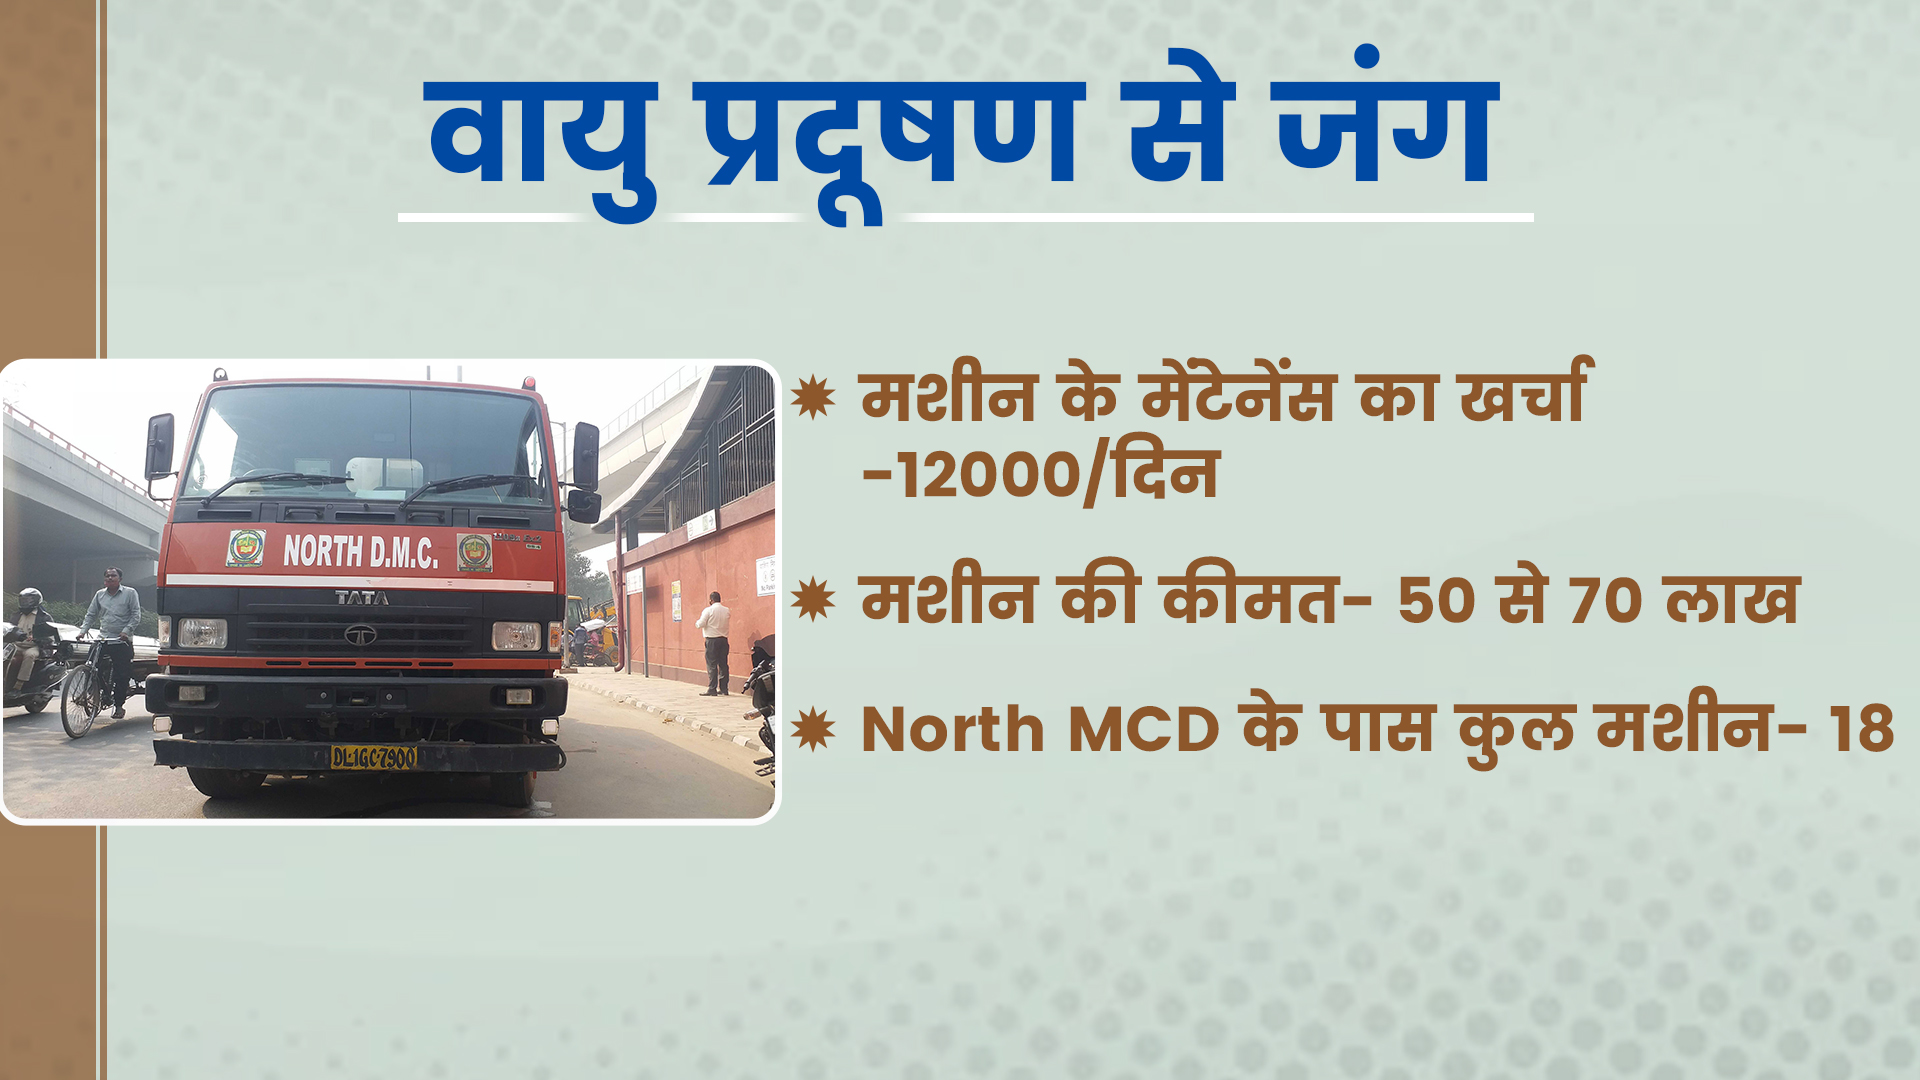 Mechanical road sweeper machine plays an important role in tackling air pollution